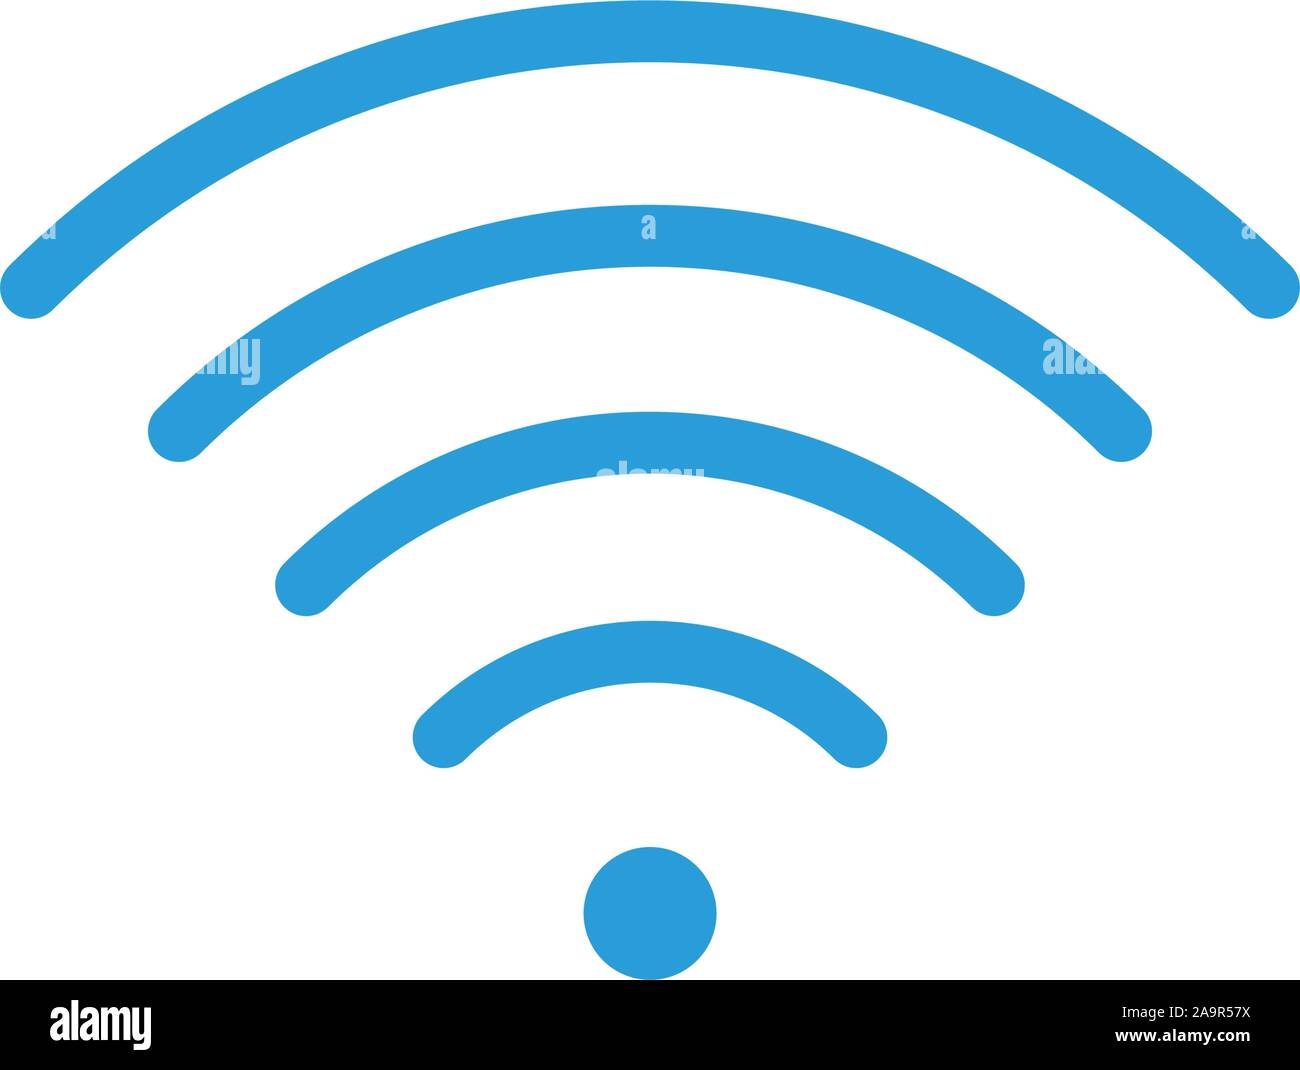 Wifi signal indicator high full signal simple icon. Stock Vector illustration isolated on white background. Stock Vector